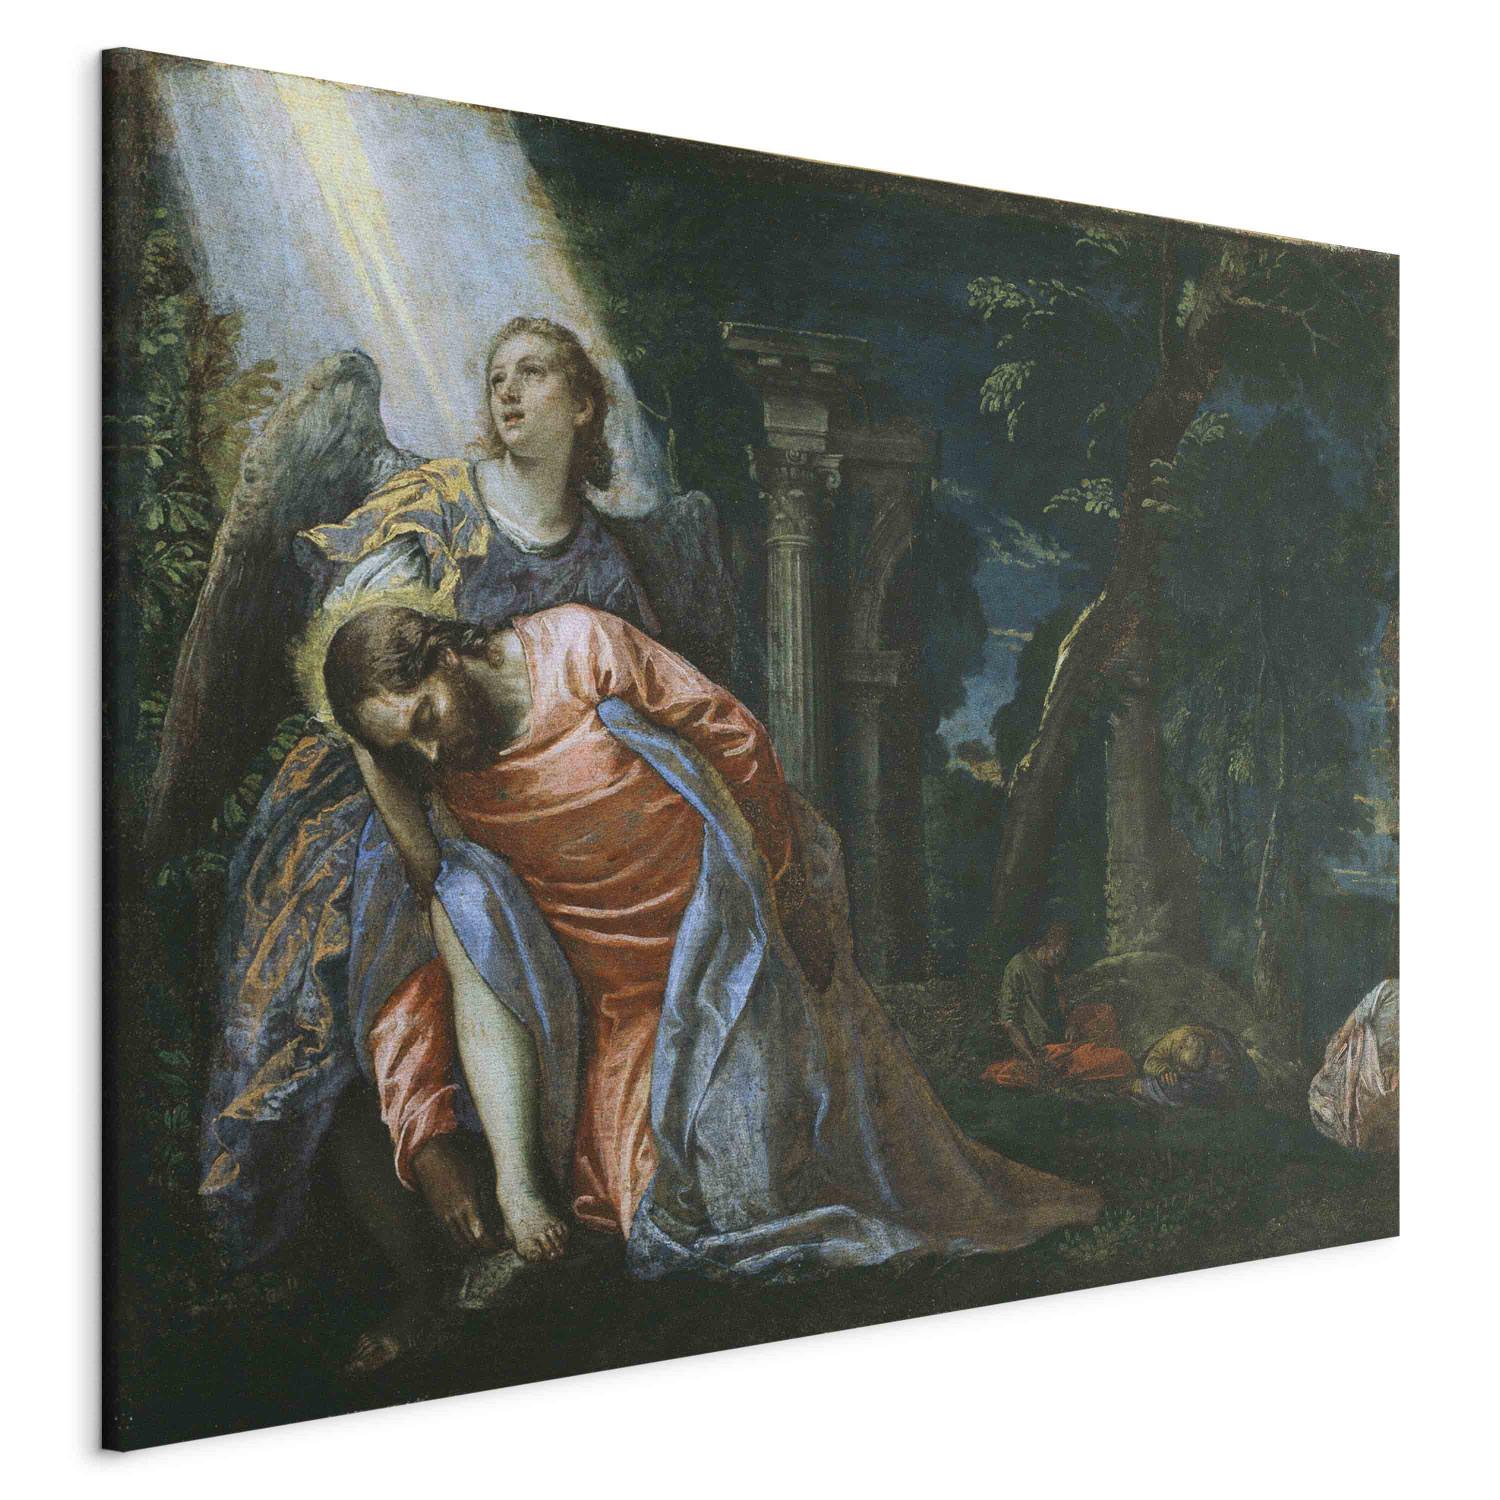 Canvas Christ in the Garden of Gethsemane, supported by an angel